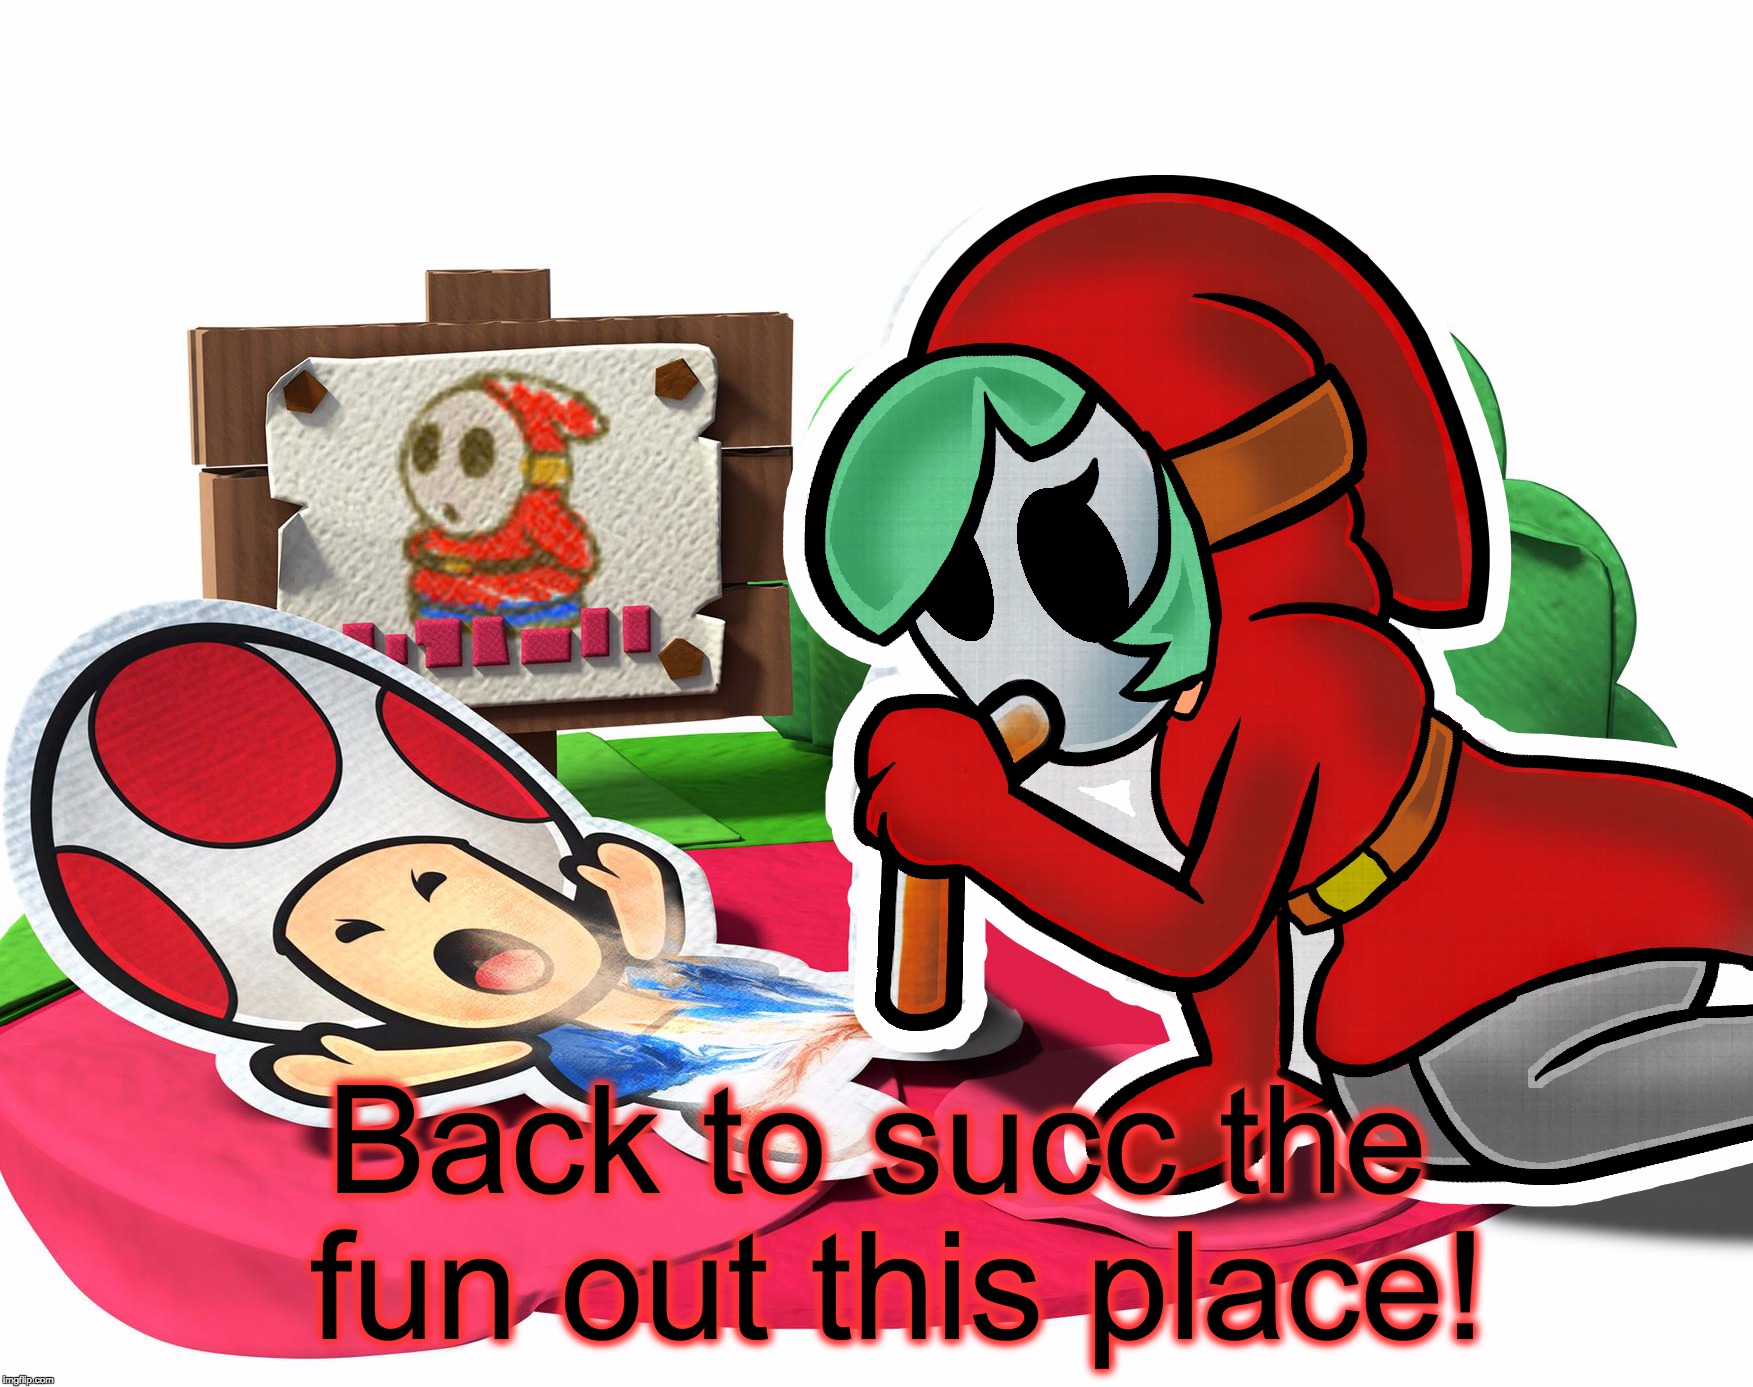 Back to succ the fun out this place! | made w/ Imgflip meme maker